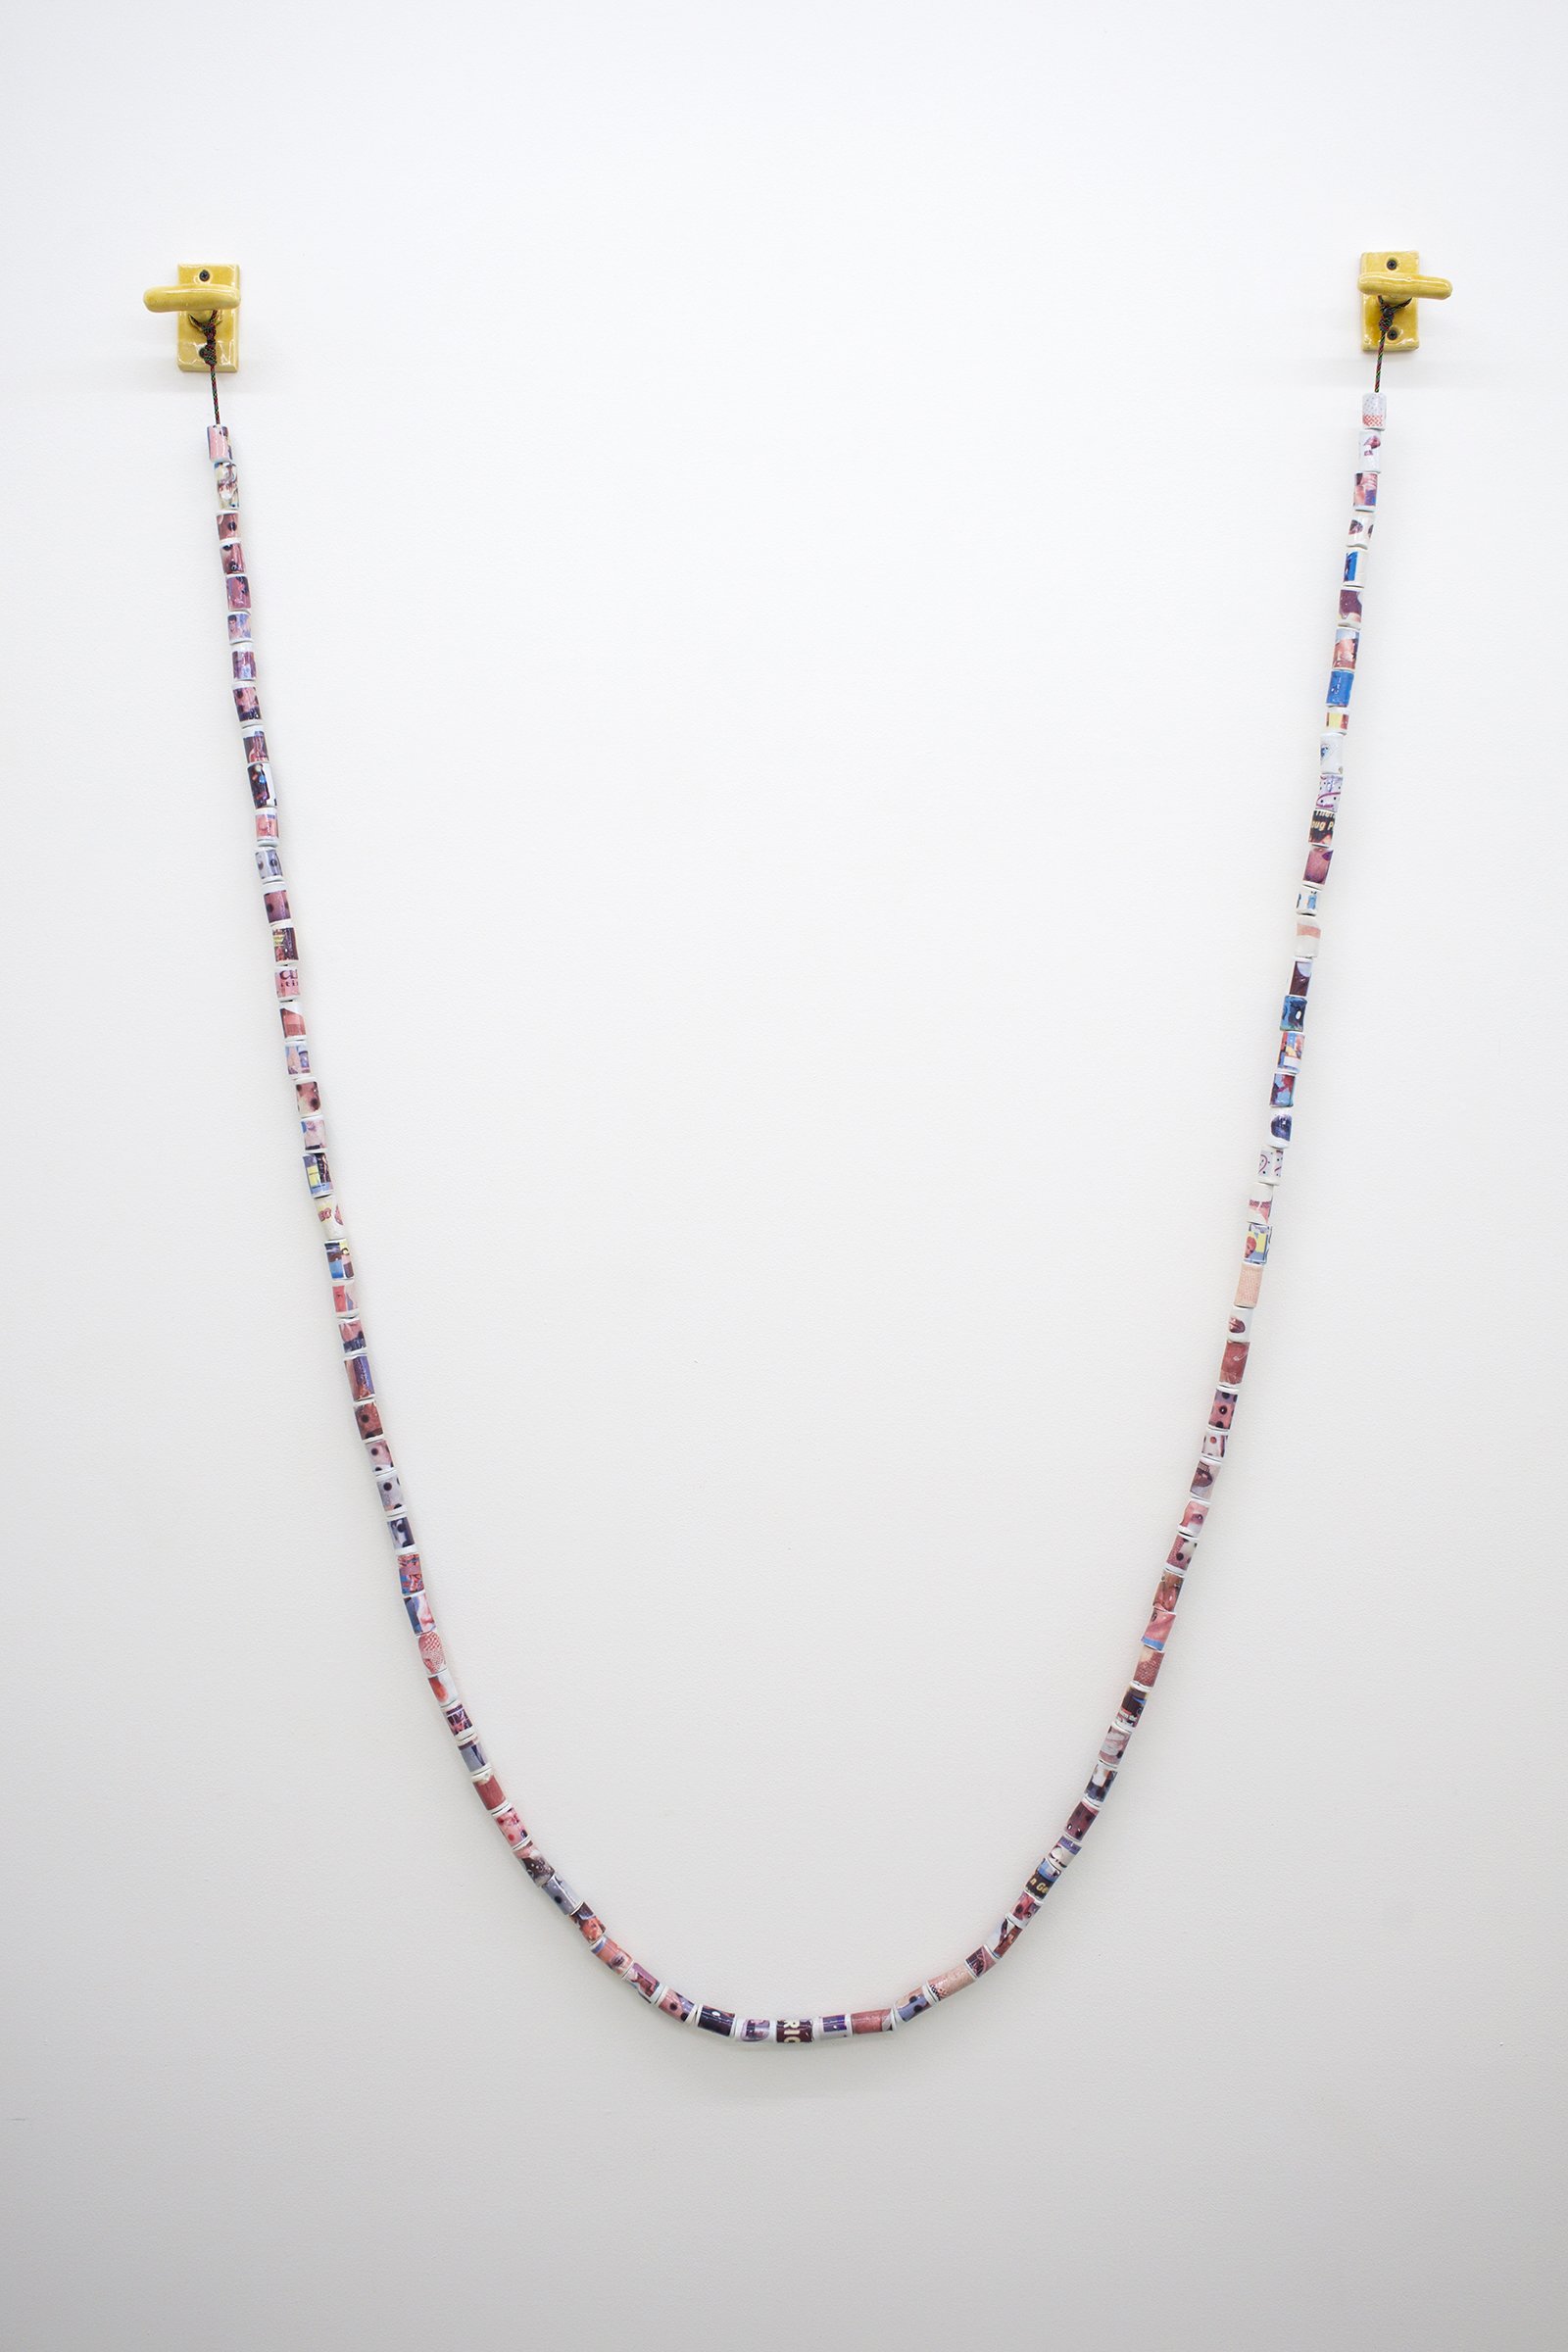   Connections II , 2022 Glazed porcelain beads with digital decals, glazed stoneware wall mounts, paracord 71” x 42” 